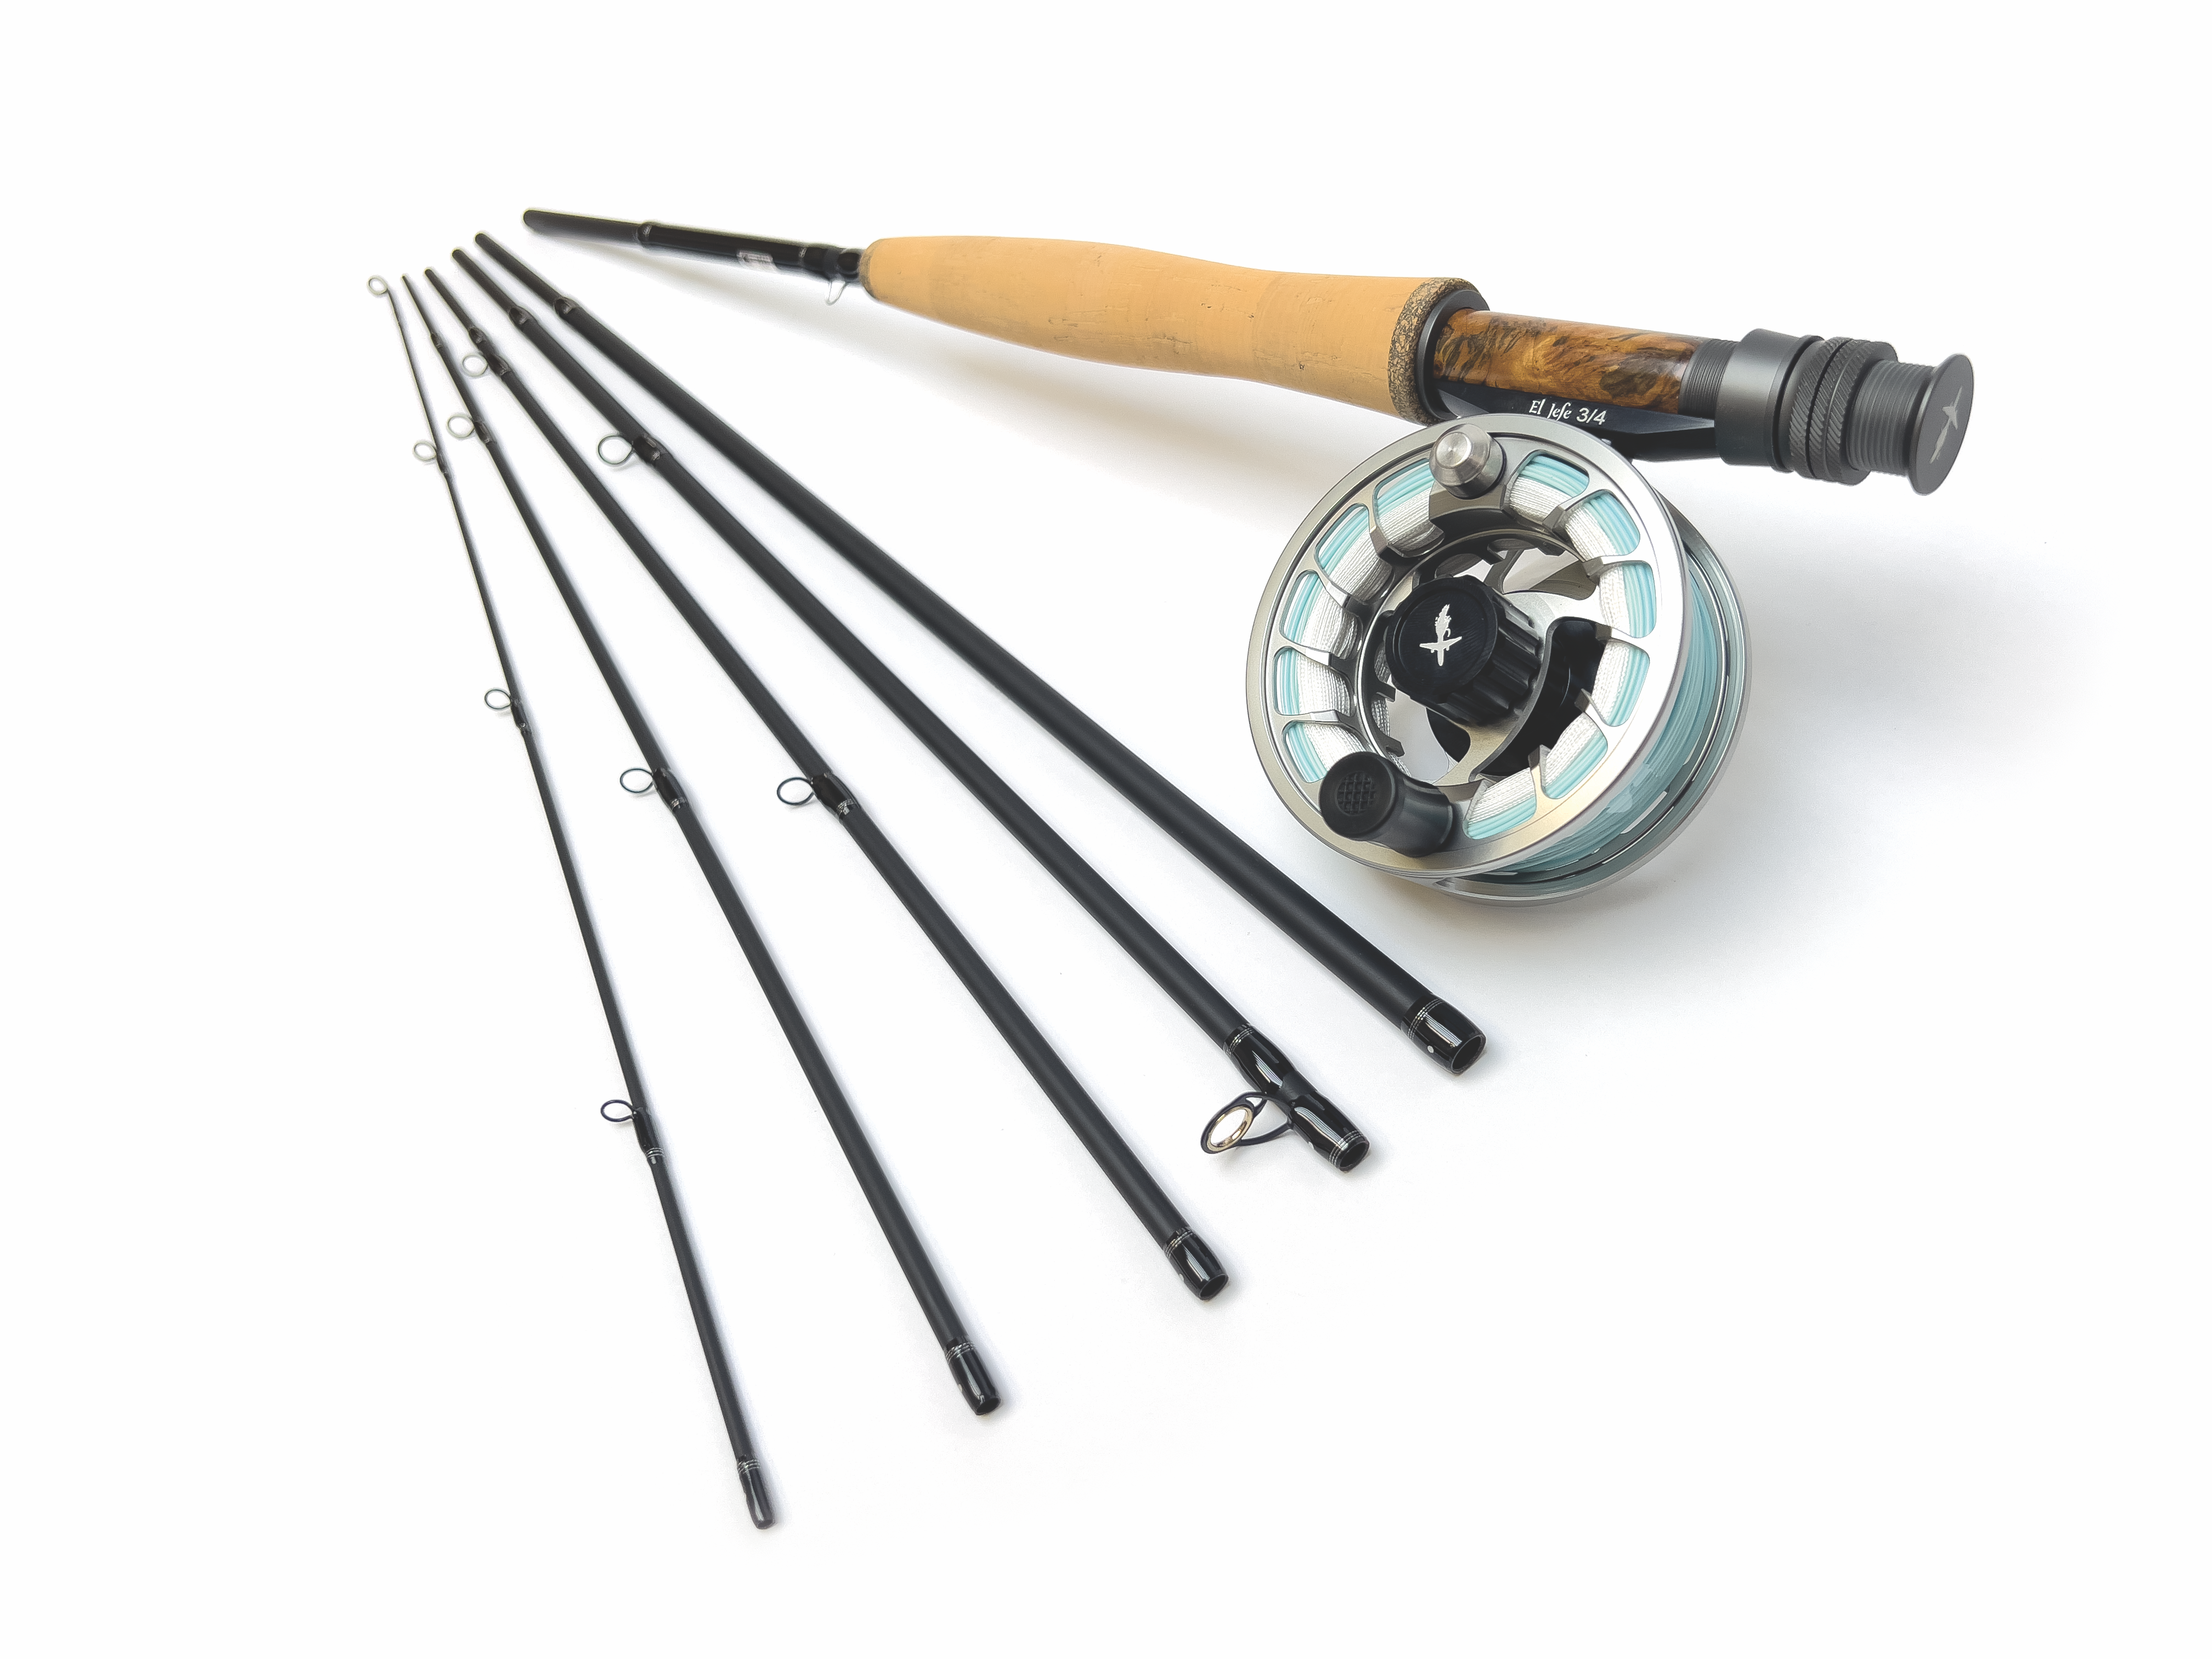 EL JEFE PACKABLE FLY FISHING RODS | 766-3/4 | 7 Foot 6 Inch 6 Section 3 or 4 Weight Fly Rod